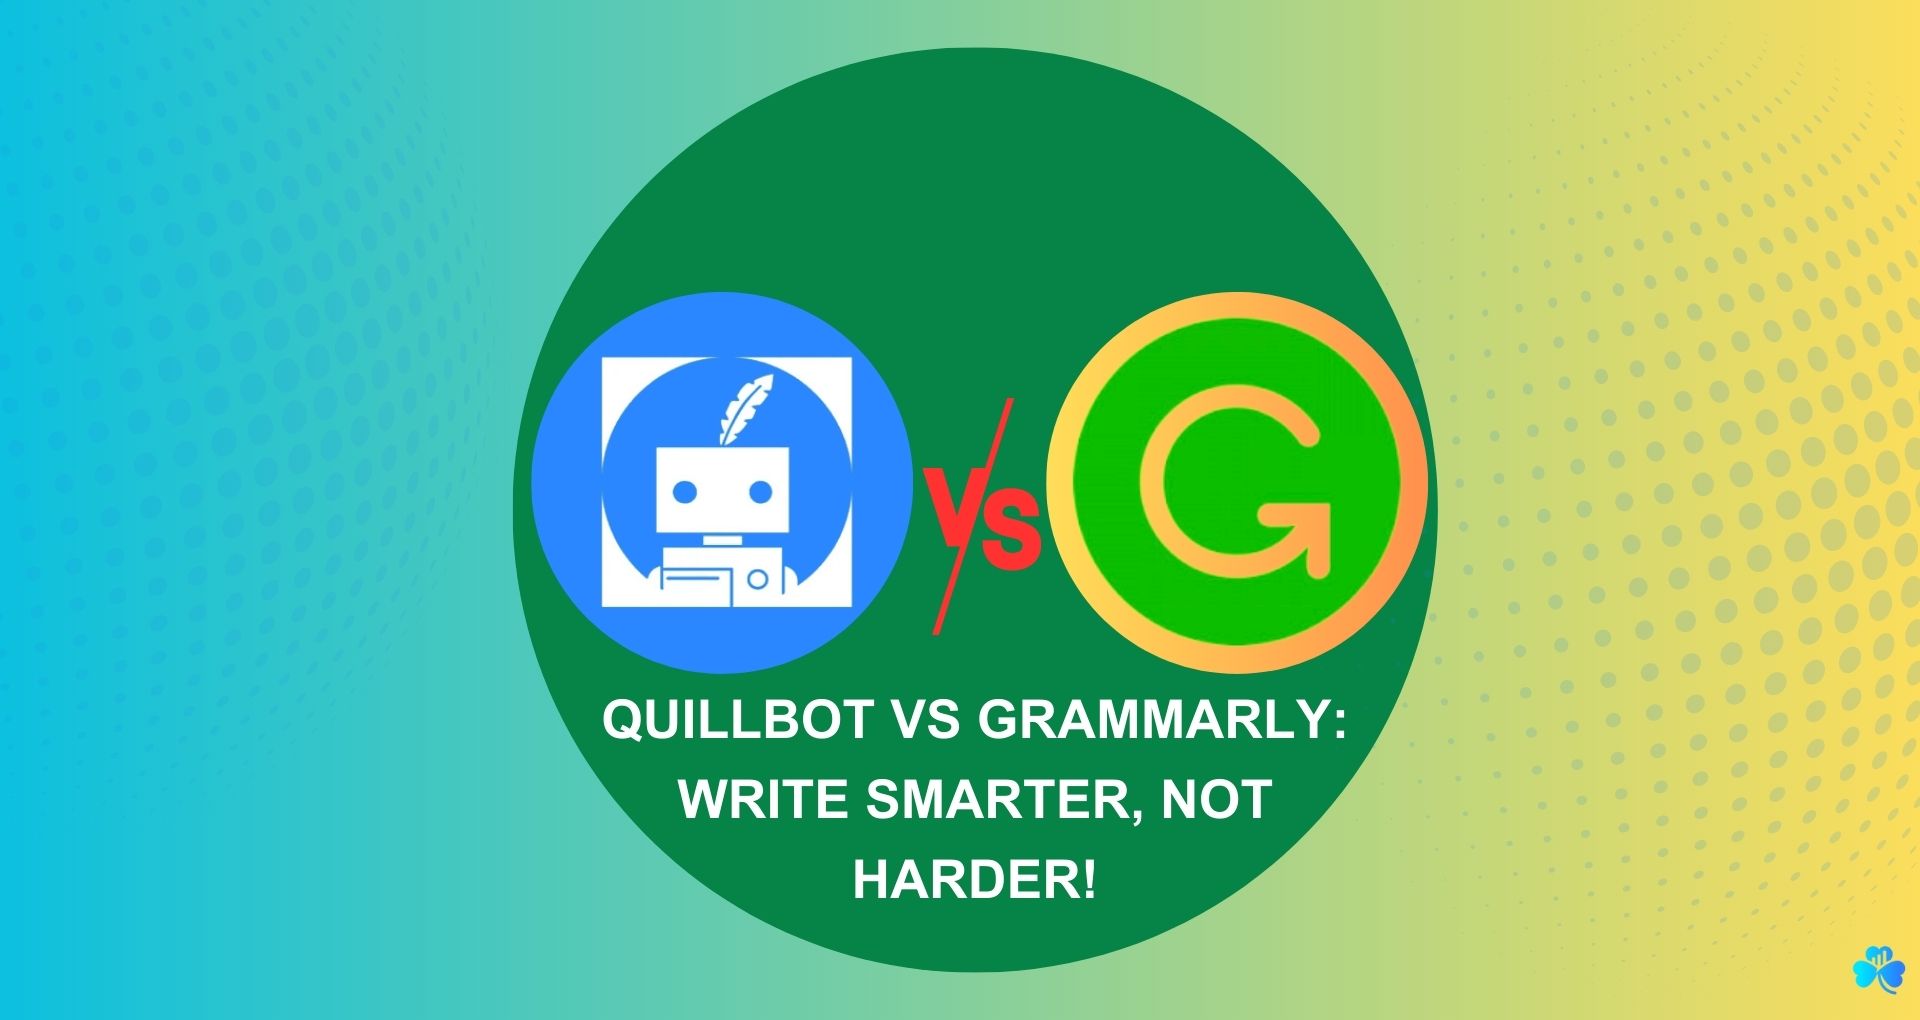 Quillbot vs Grammarly featured image